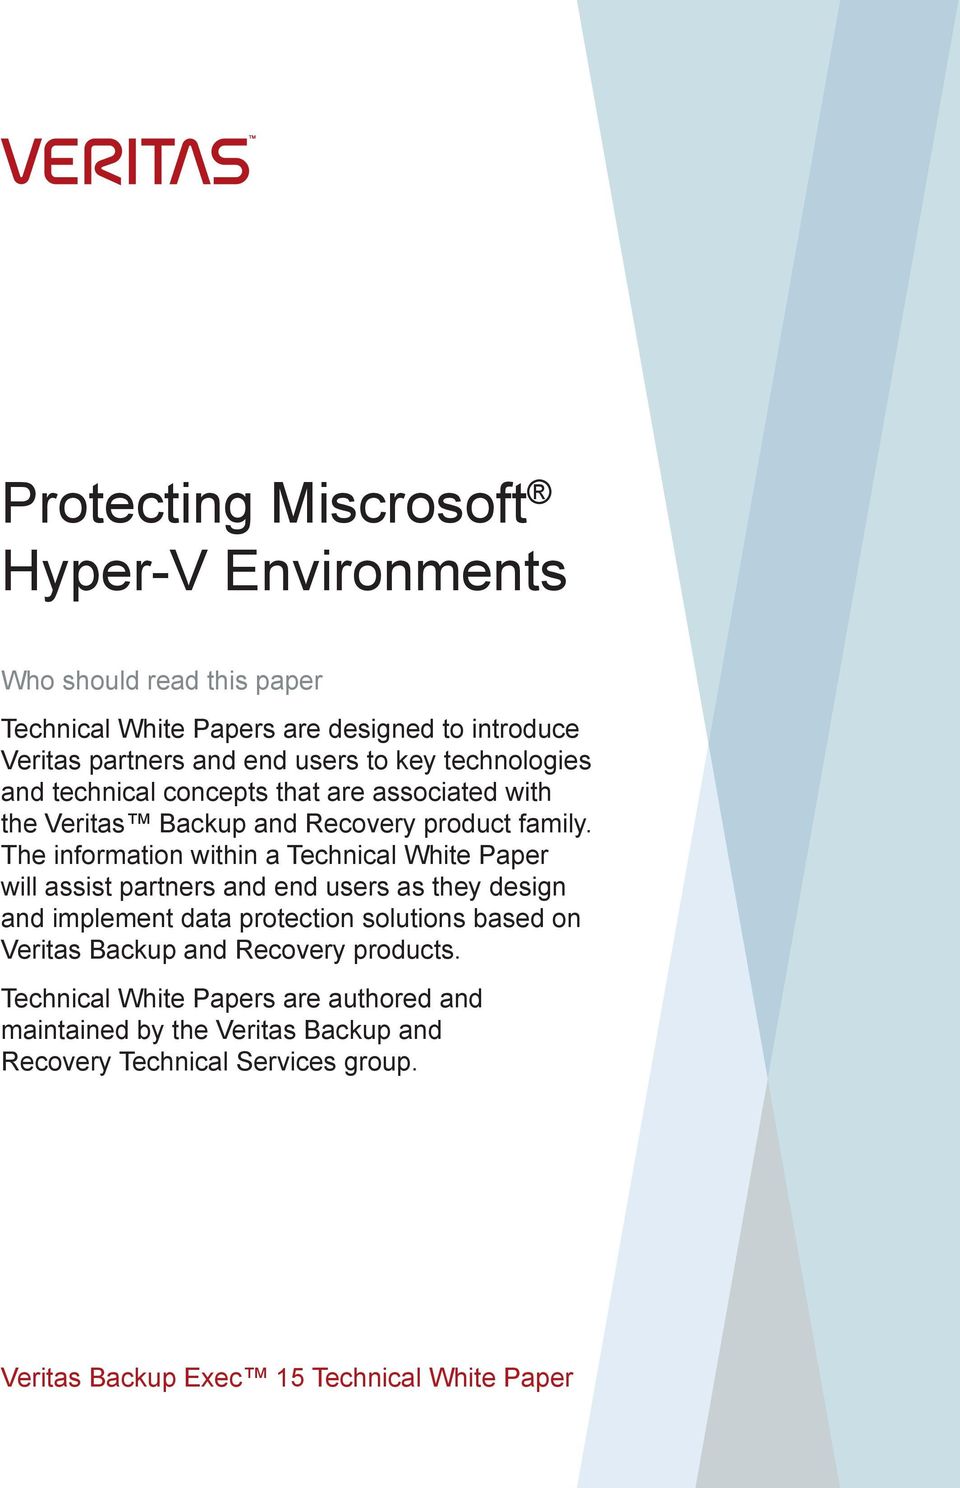 The information within a Technical White Paper will assist partners and end users as they design and implement data protection solutions based on